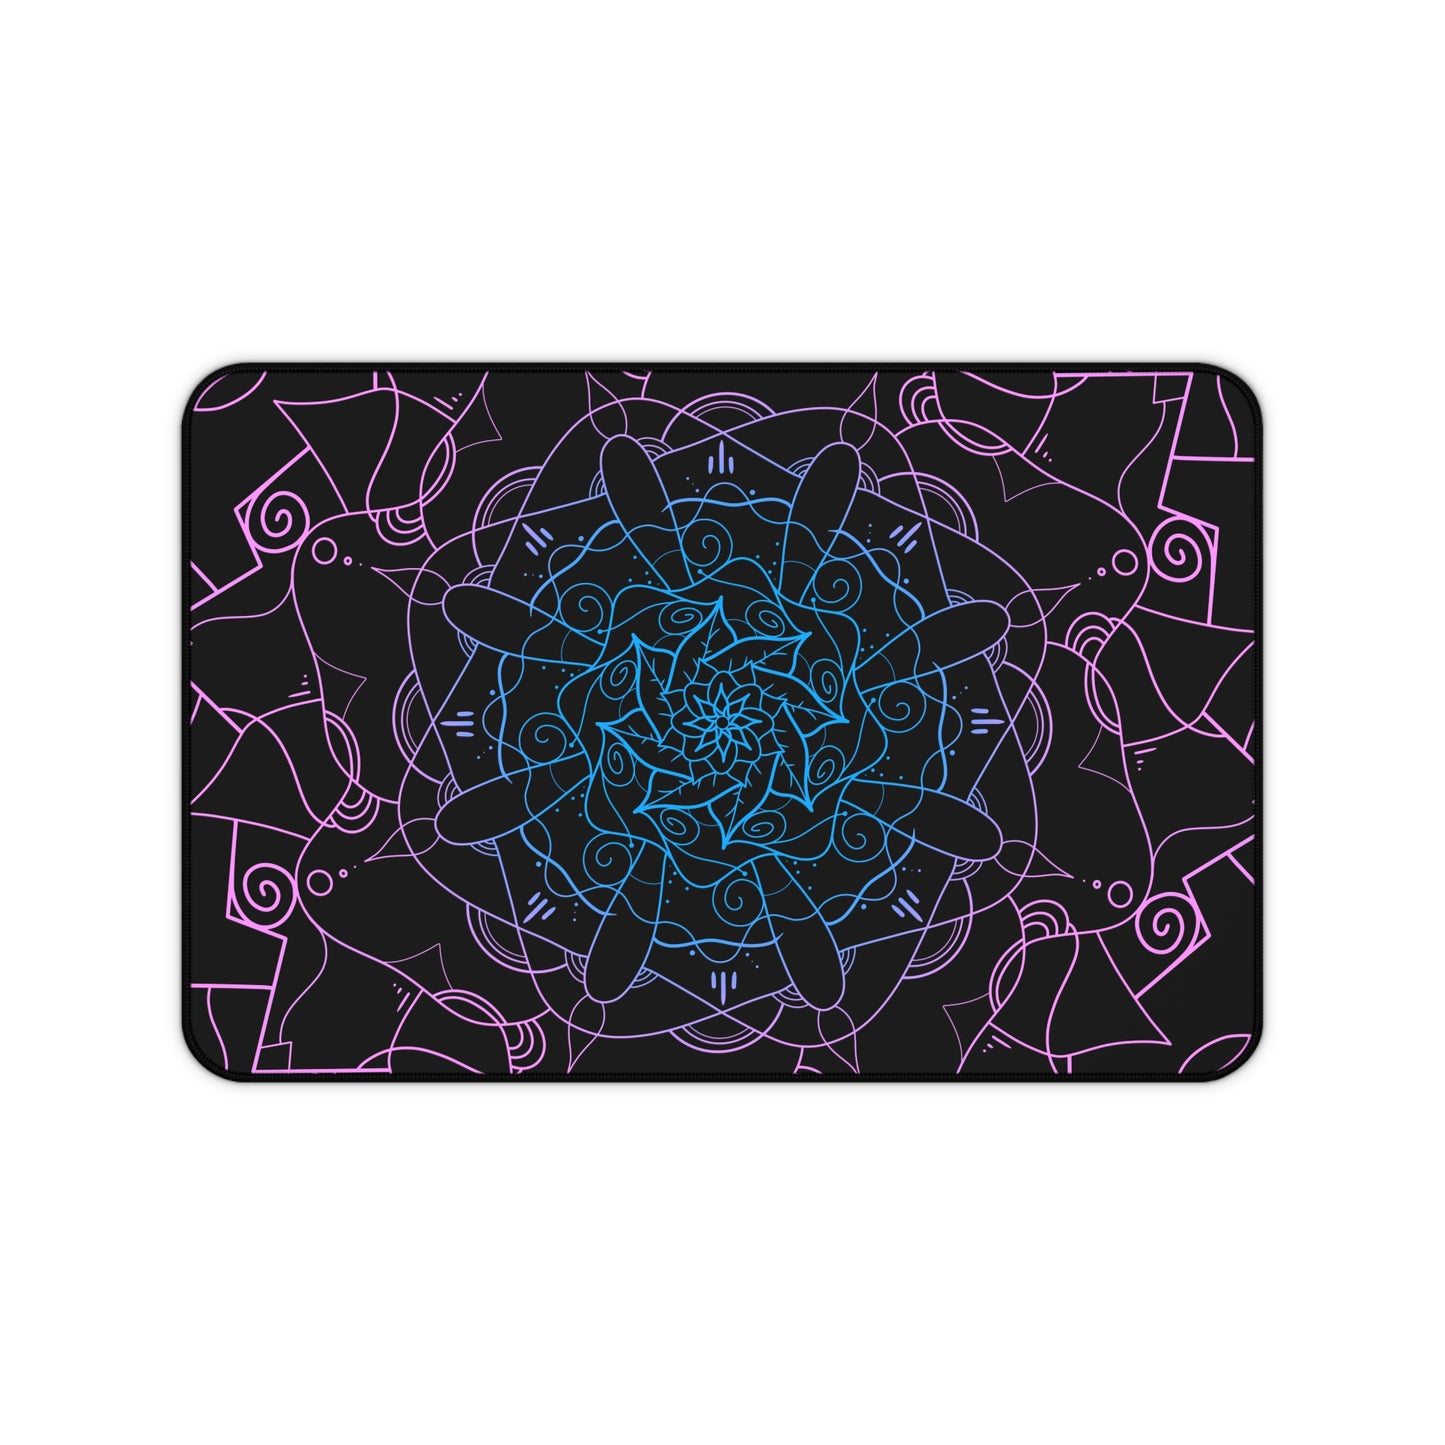 A 12" x 18" desk mat with a pink and blue mandala pattern on a black background.